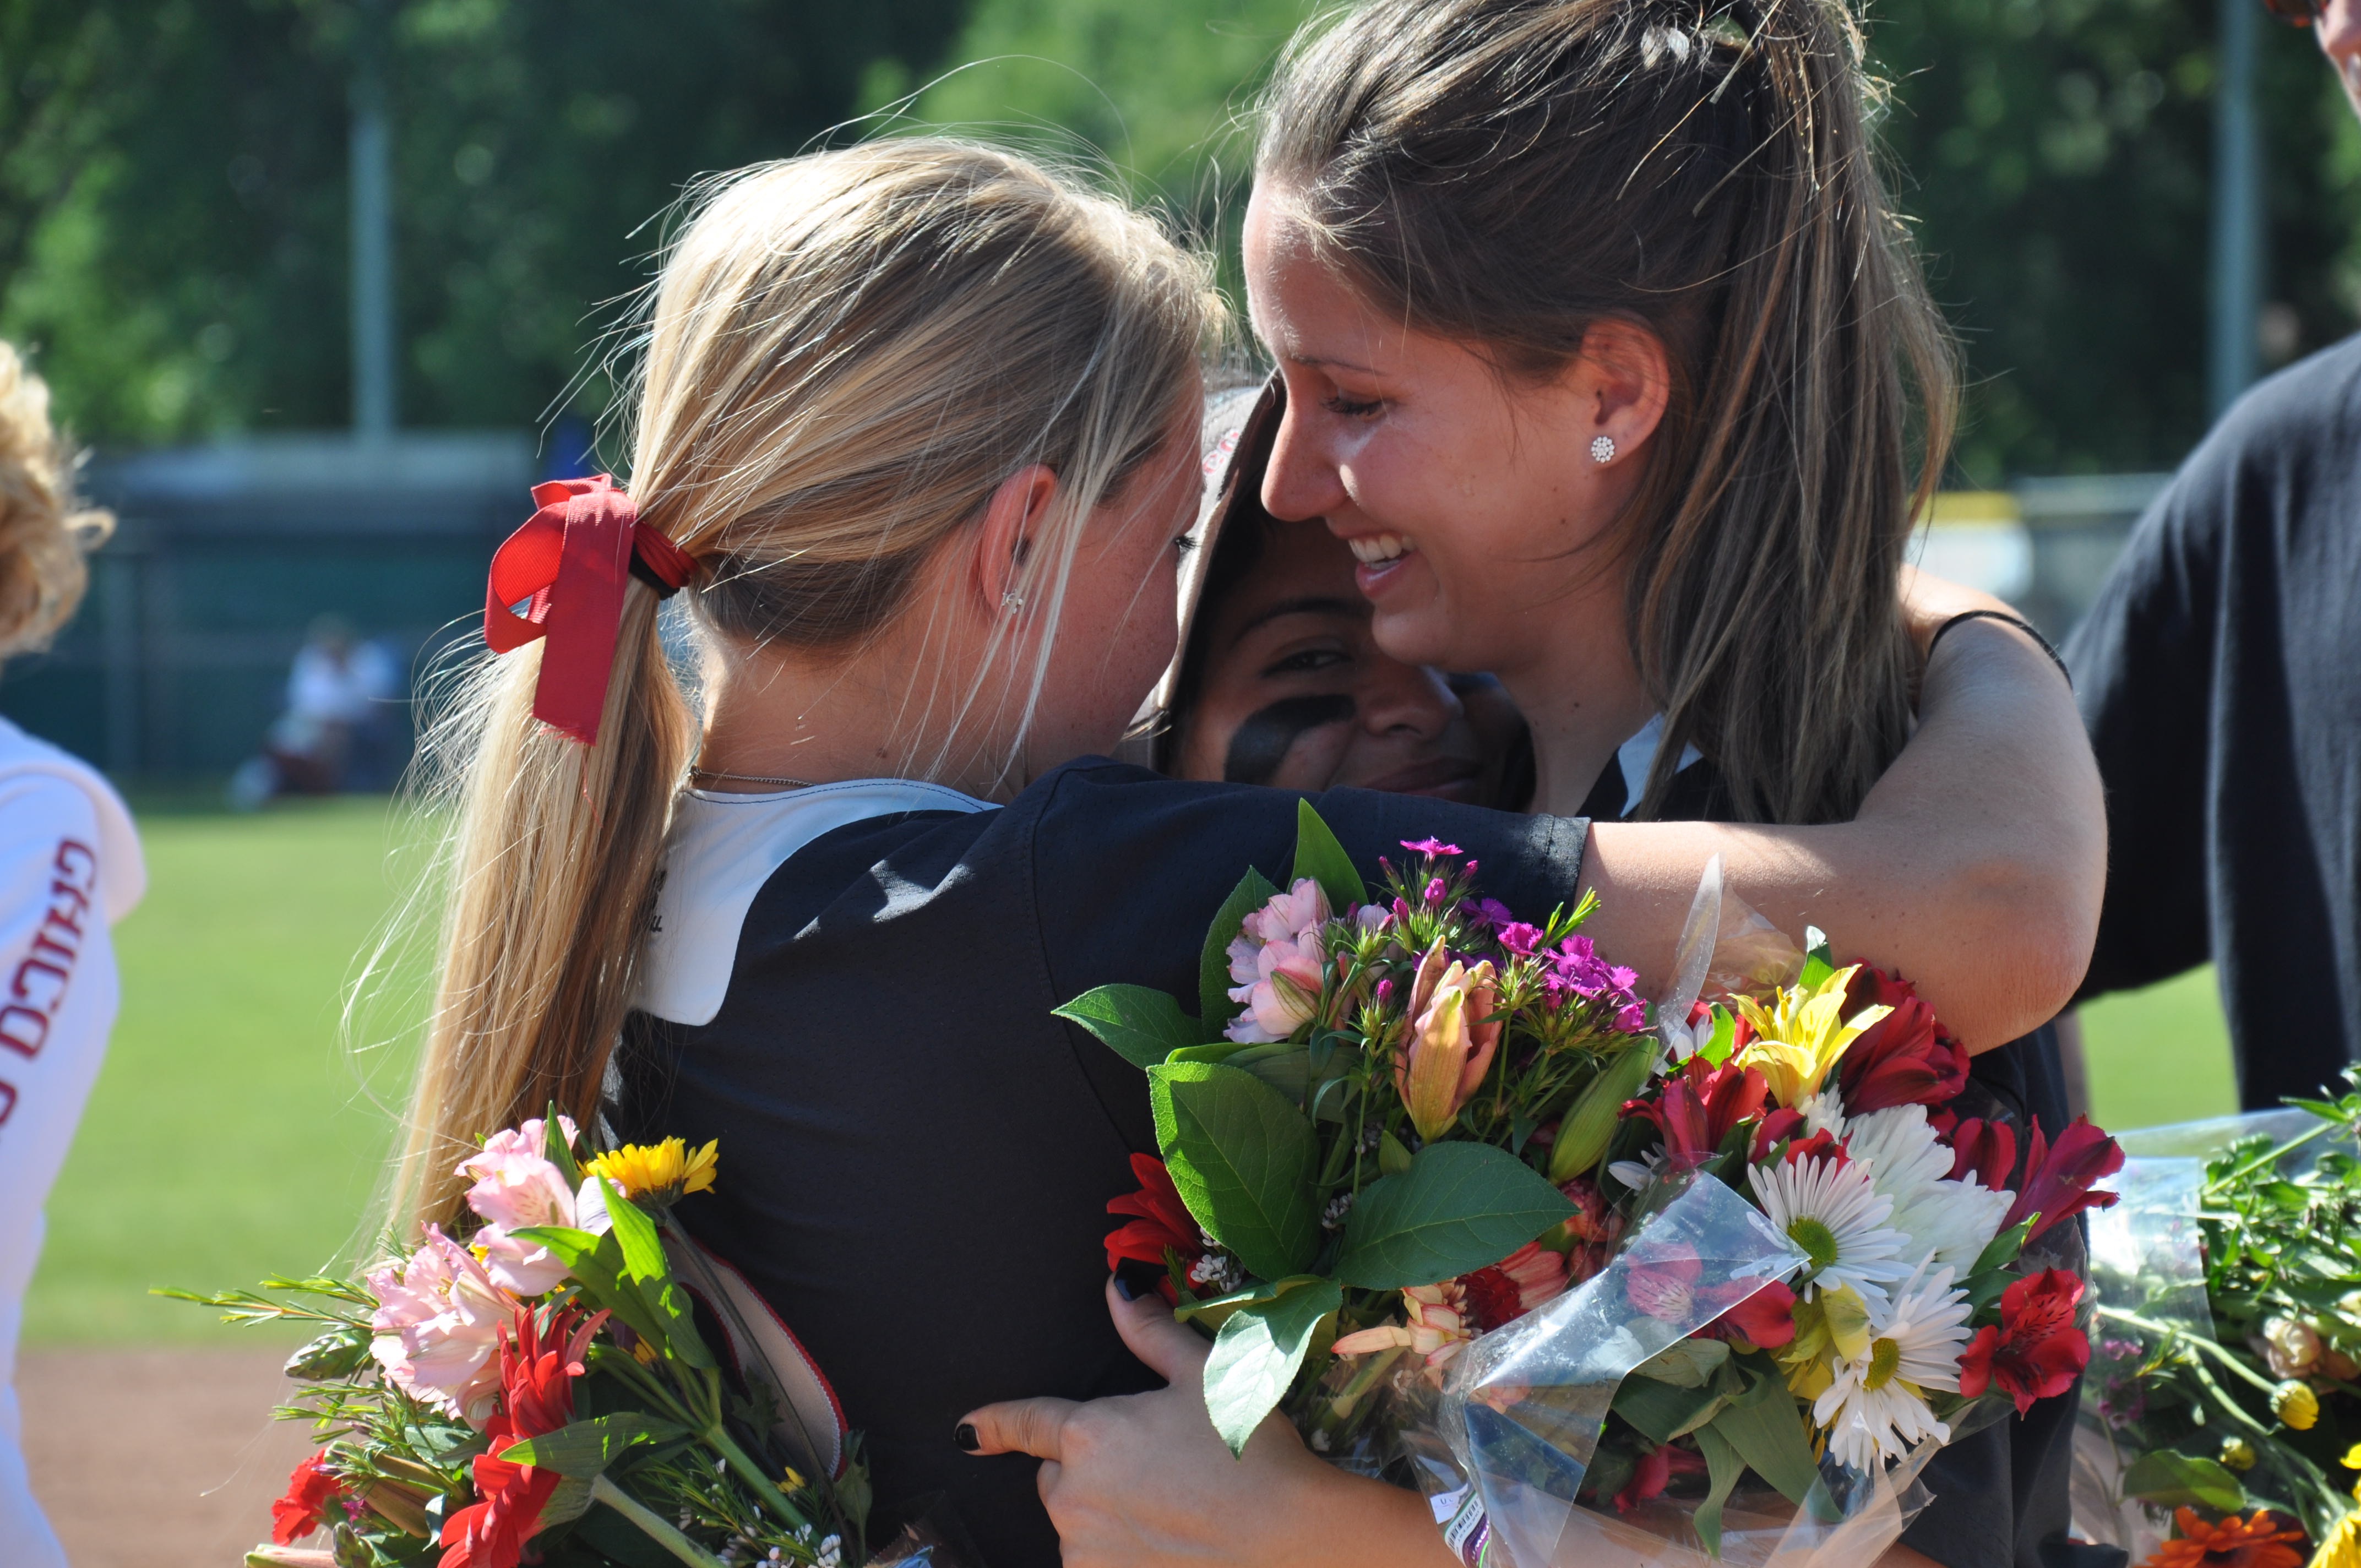 softball players embrace to show support